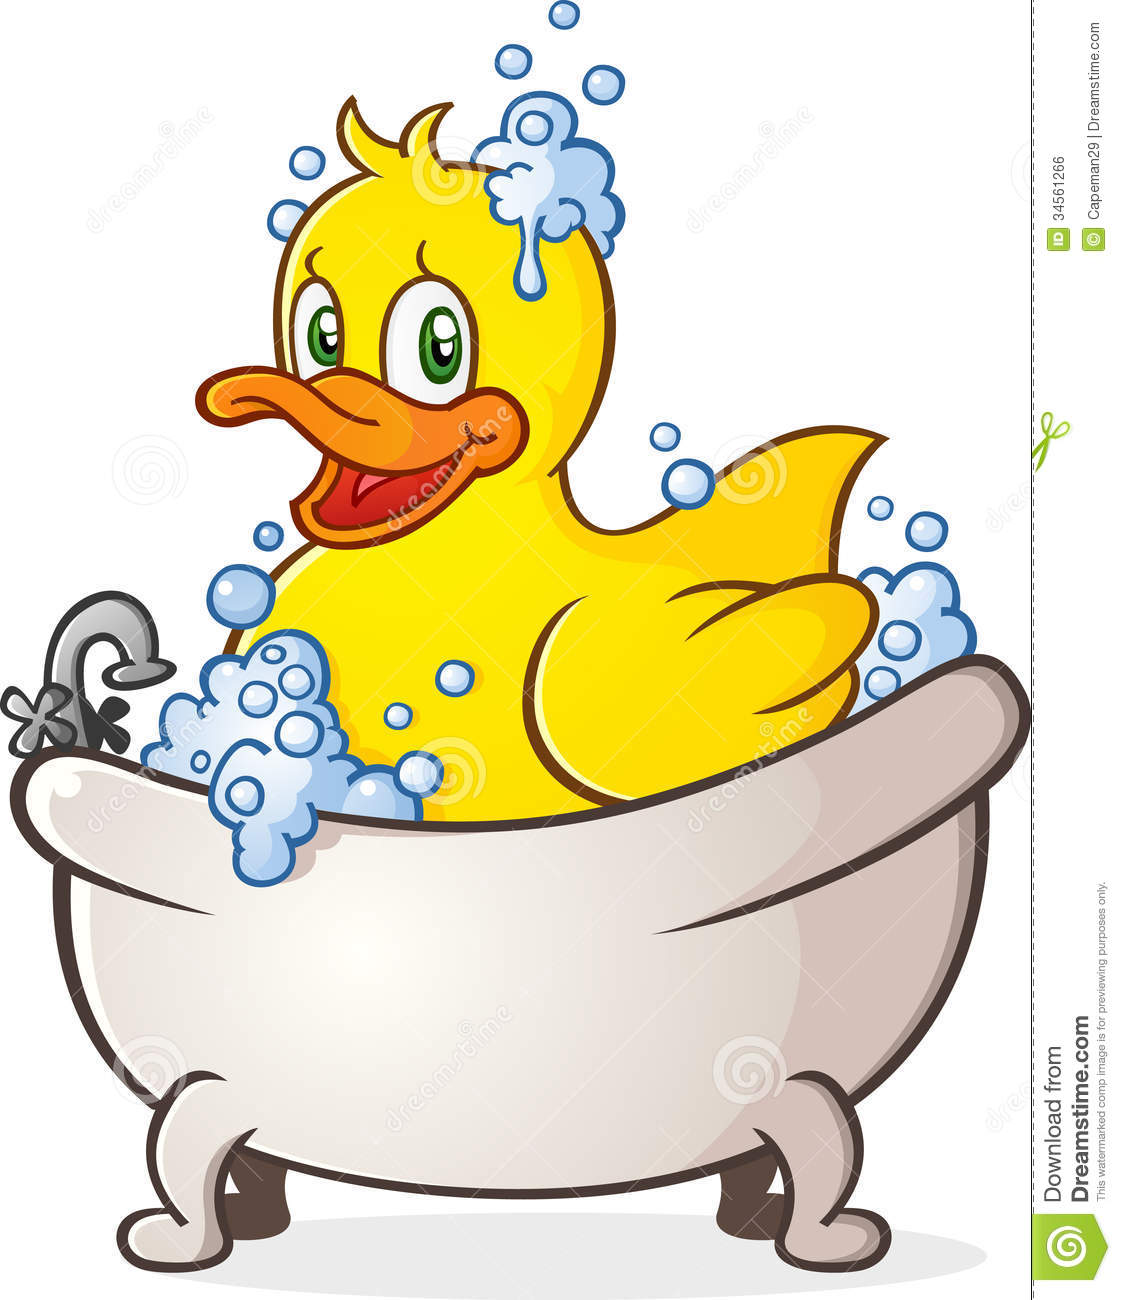 Rubber Duck Bubble Bath Cartoon Character Royalty Free Stock Image